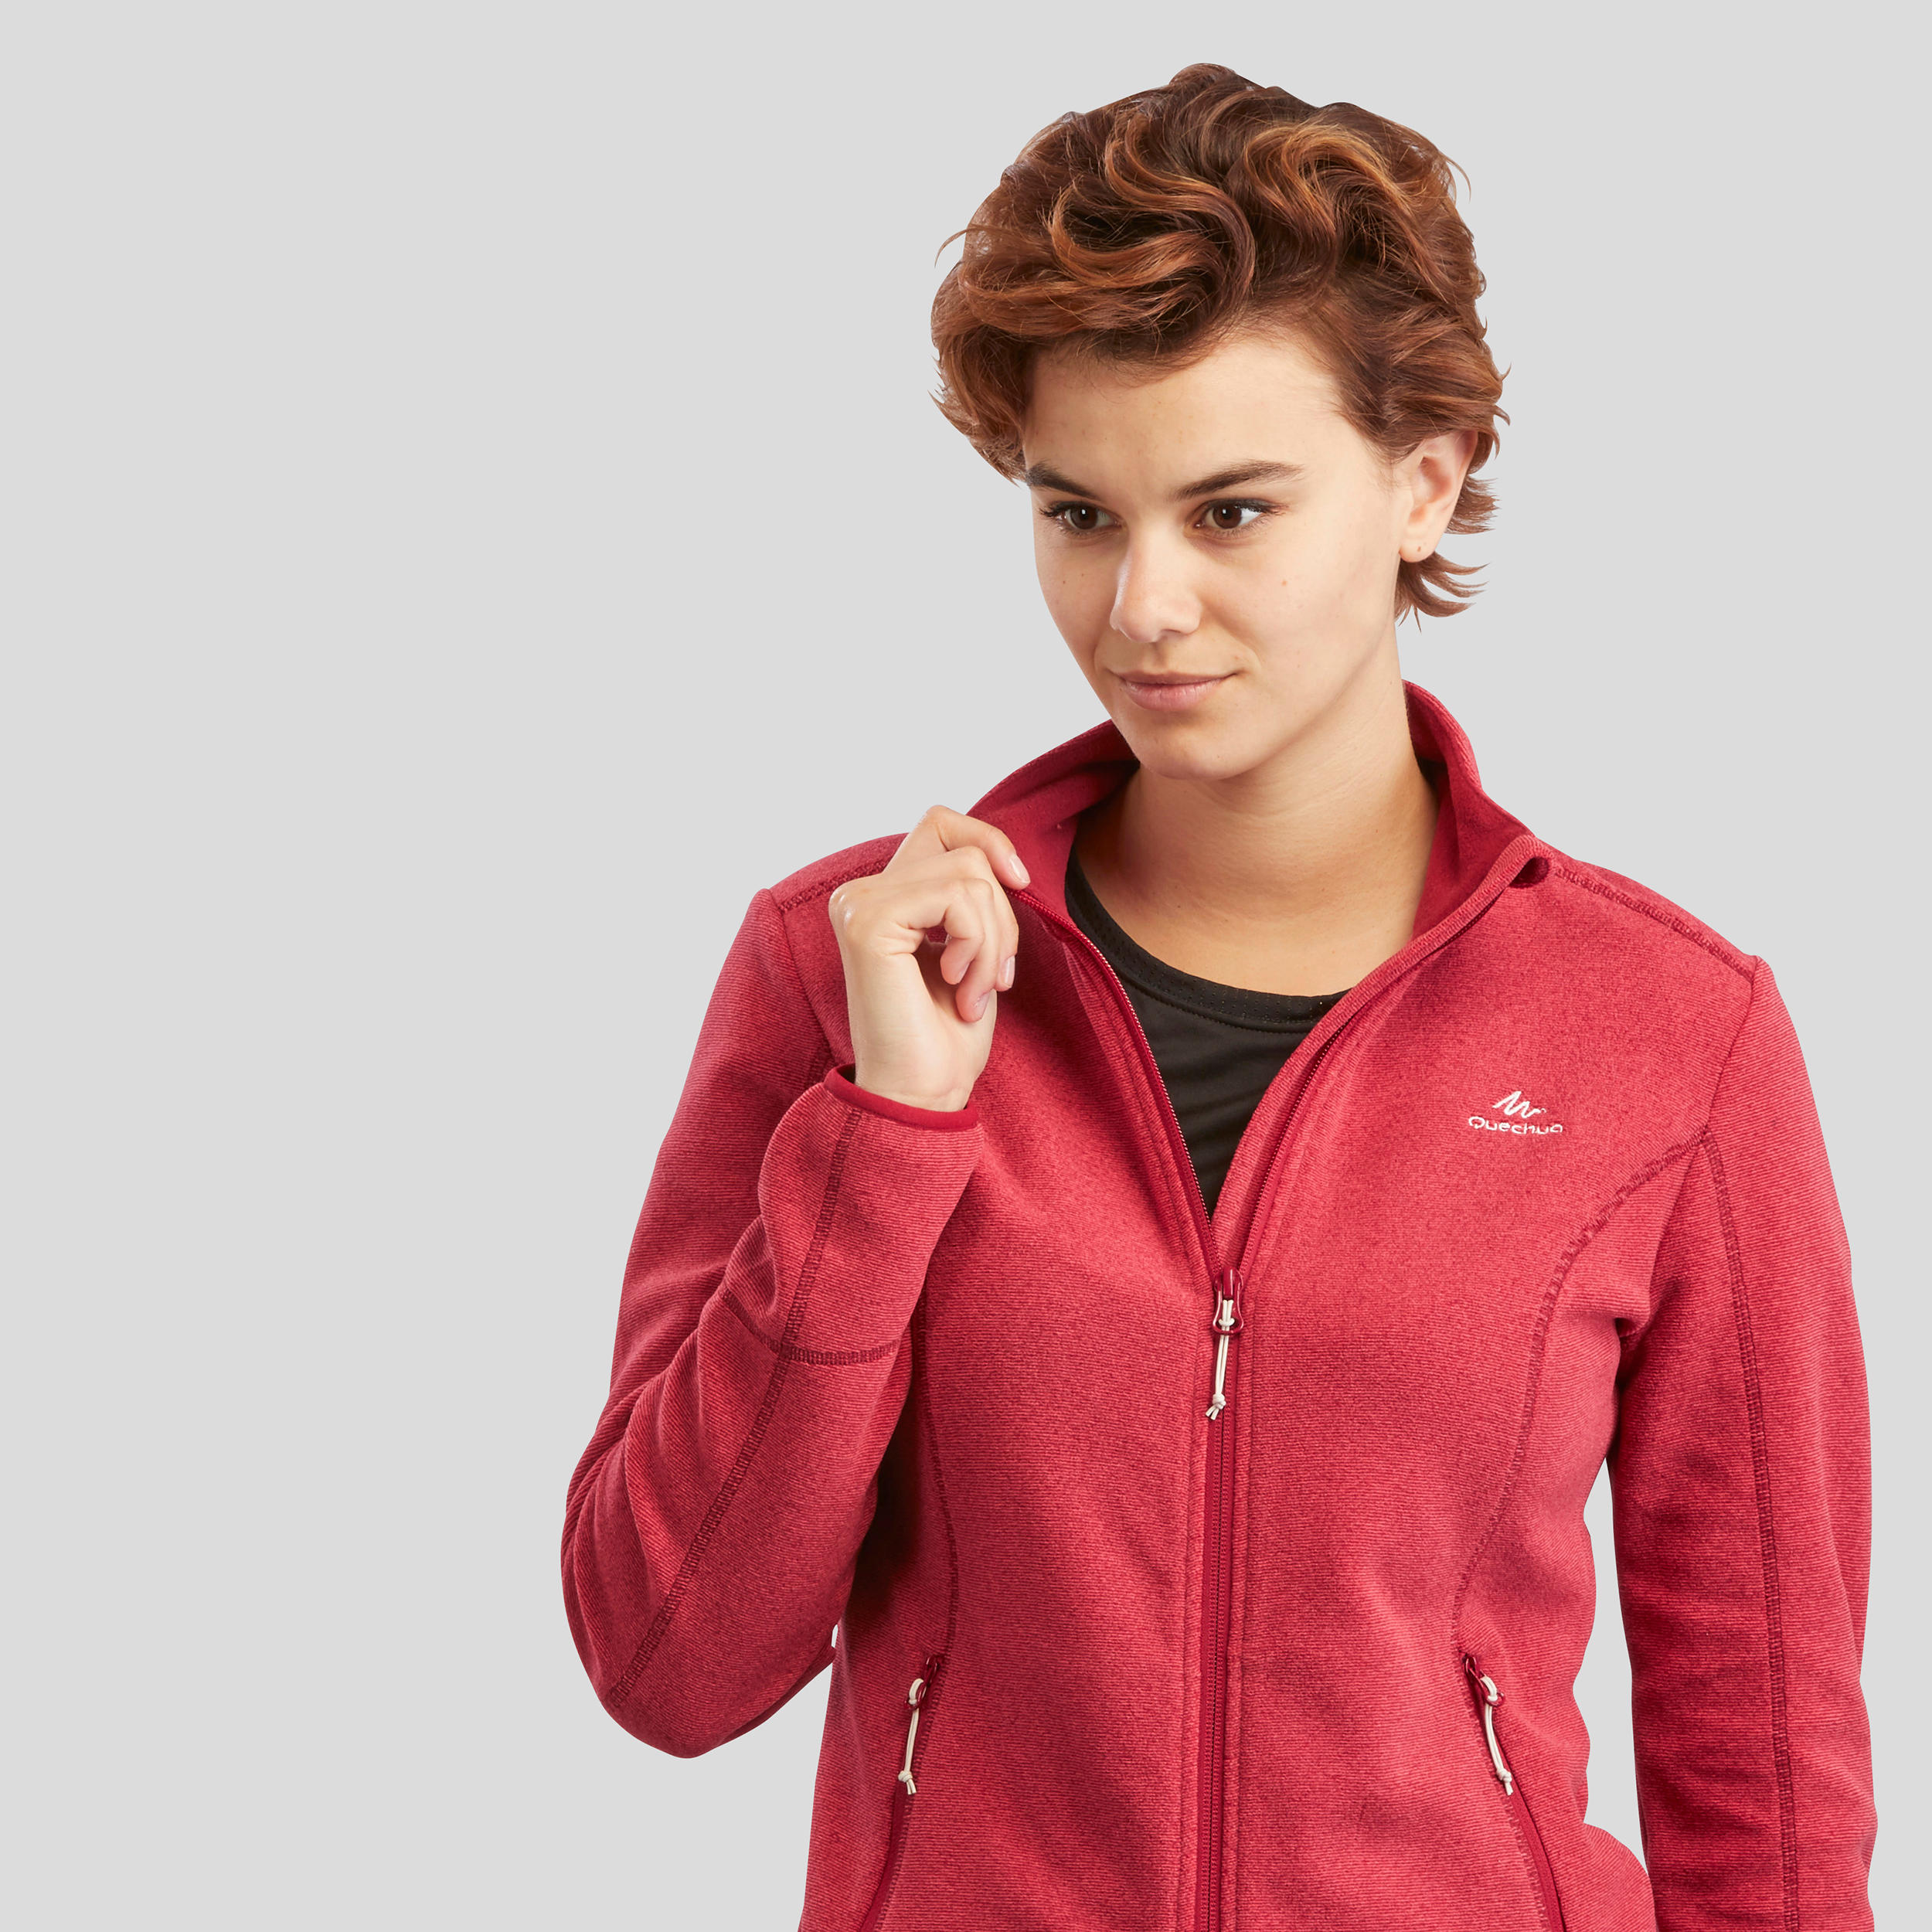 Women Sweater Full-Zip Fleece for Hiking MH100 Coral Red